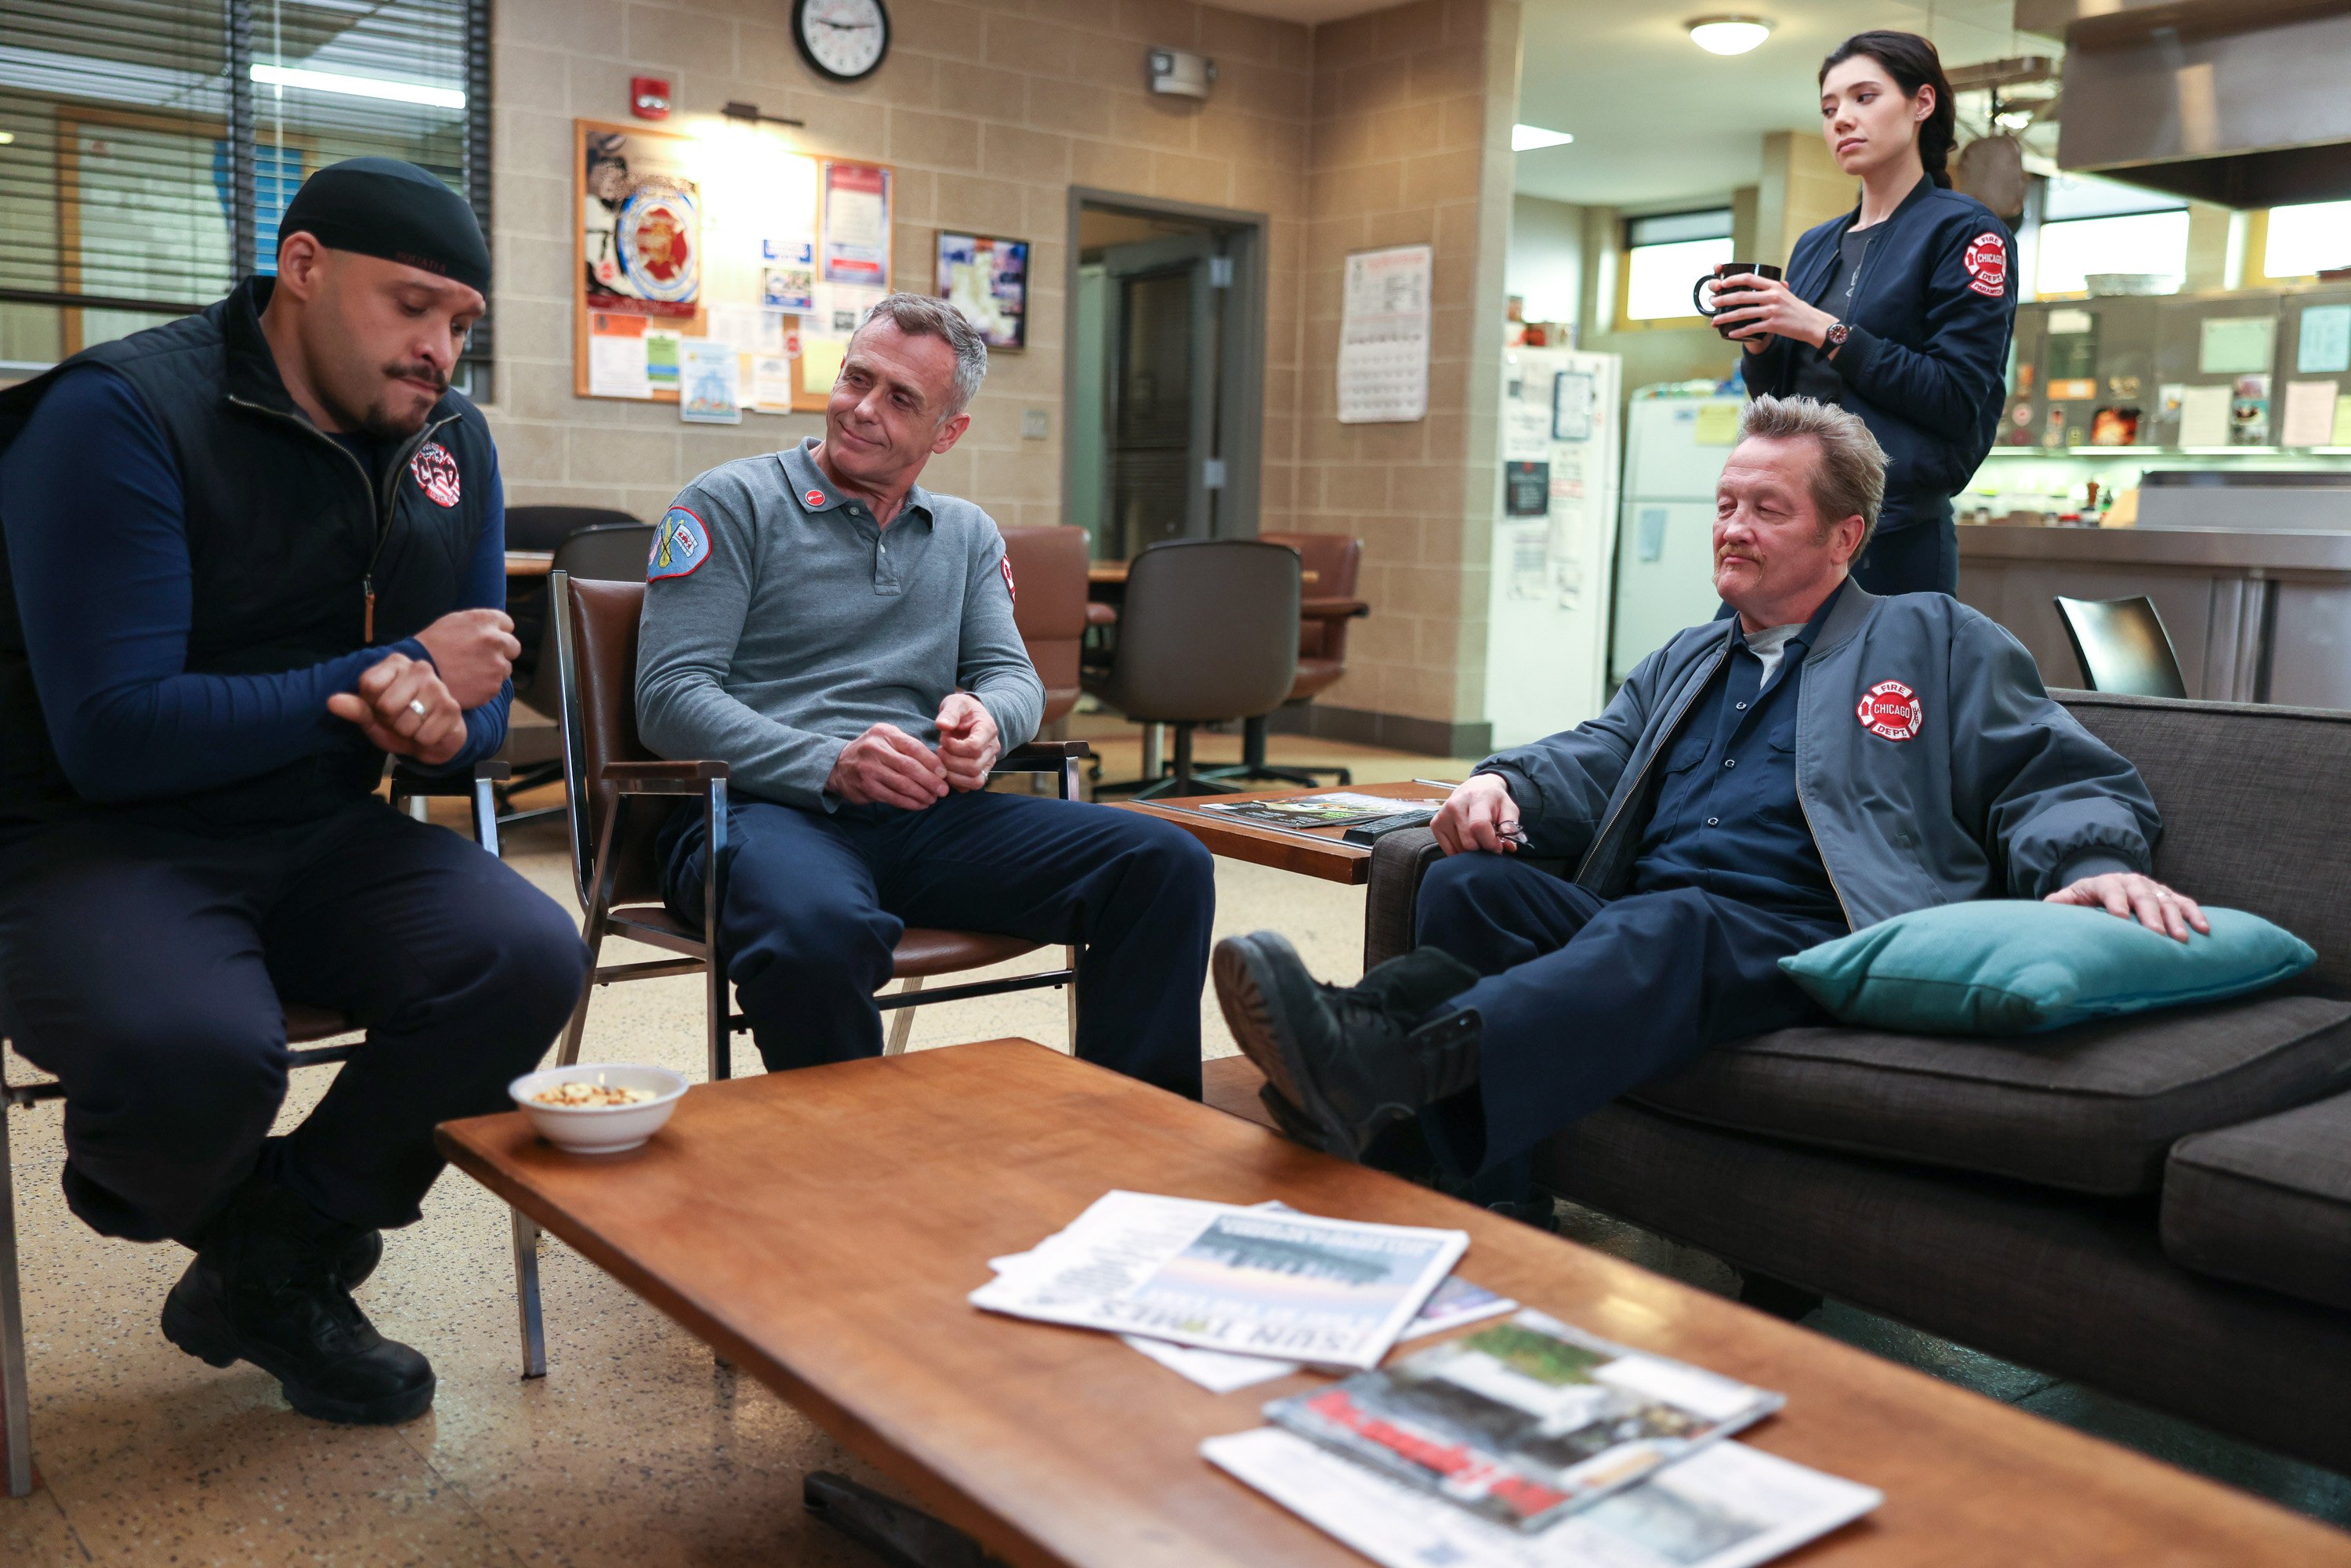 The Chicago Fire cast sits in the fire house and talks.